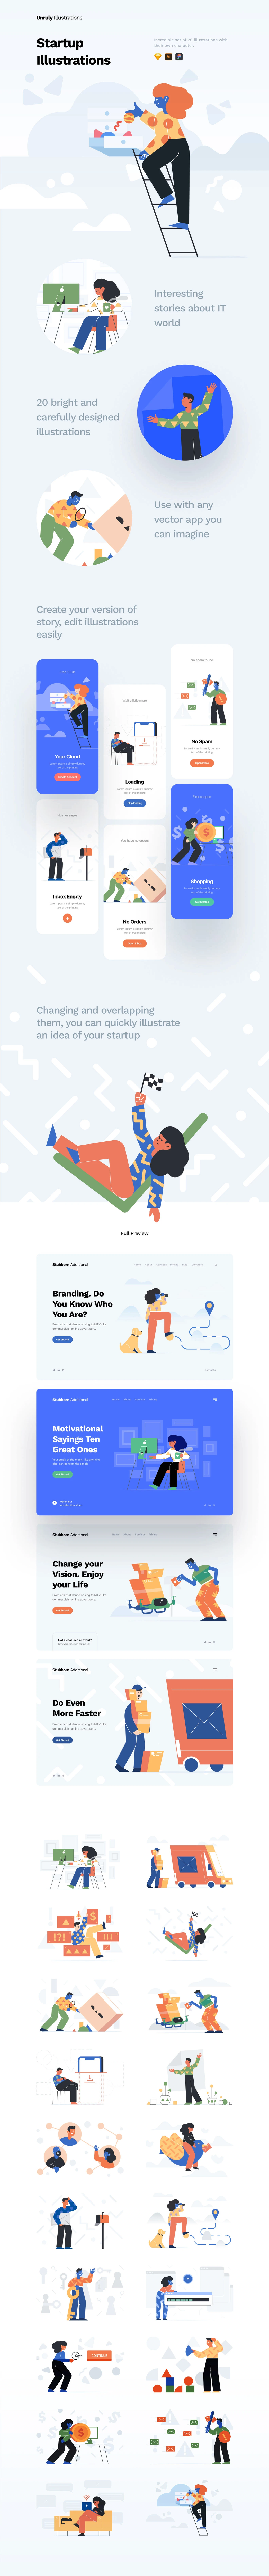 Unruly Landing Page Illustrations - 20 bright illustrations, carefully designed for your website, app, or presentation. All of them are fully customizable for rendering any idea and bringing it home to everyone. They are available in EPS, SVG, PNG, Ai, Sketch and Figma — choose any convenient format you want.